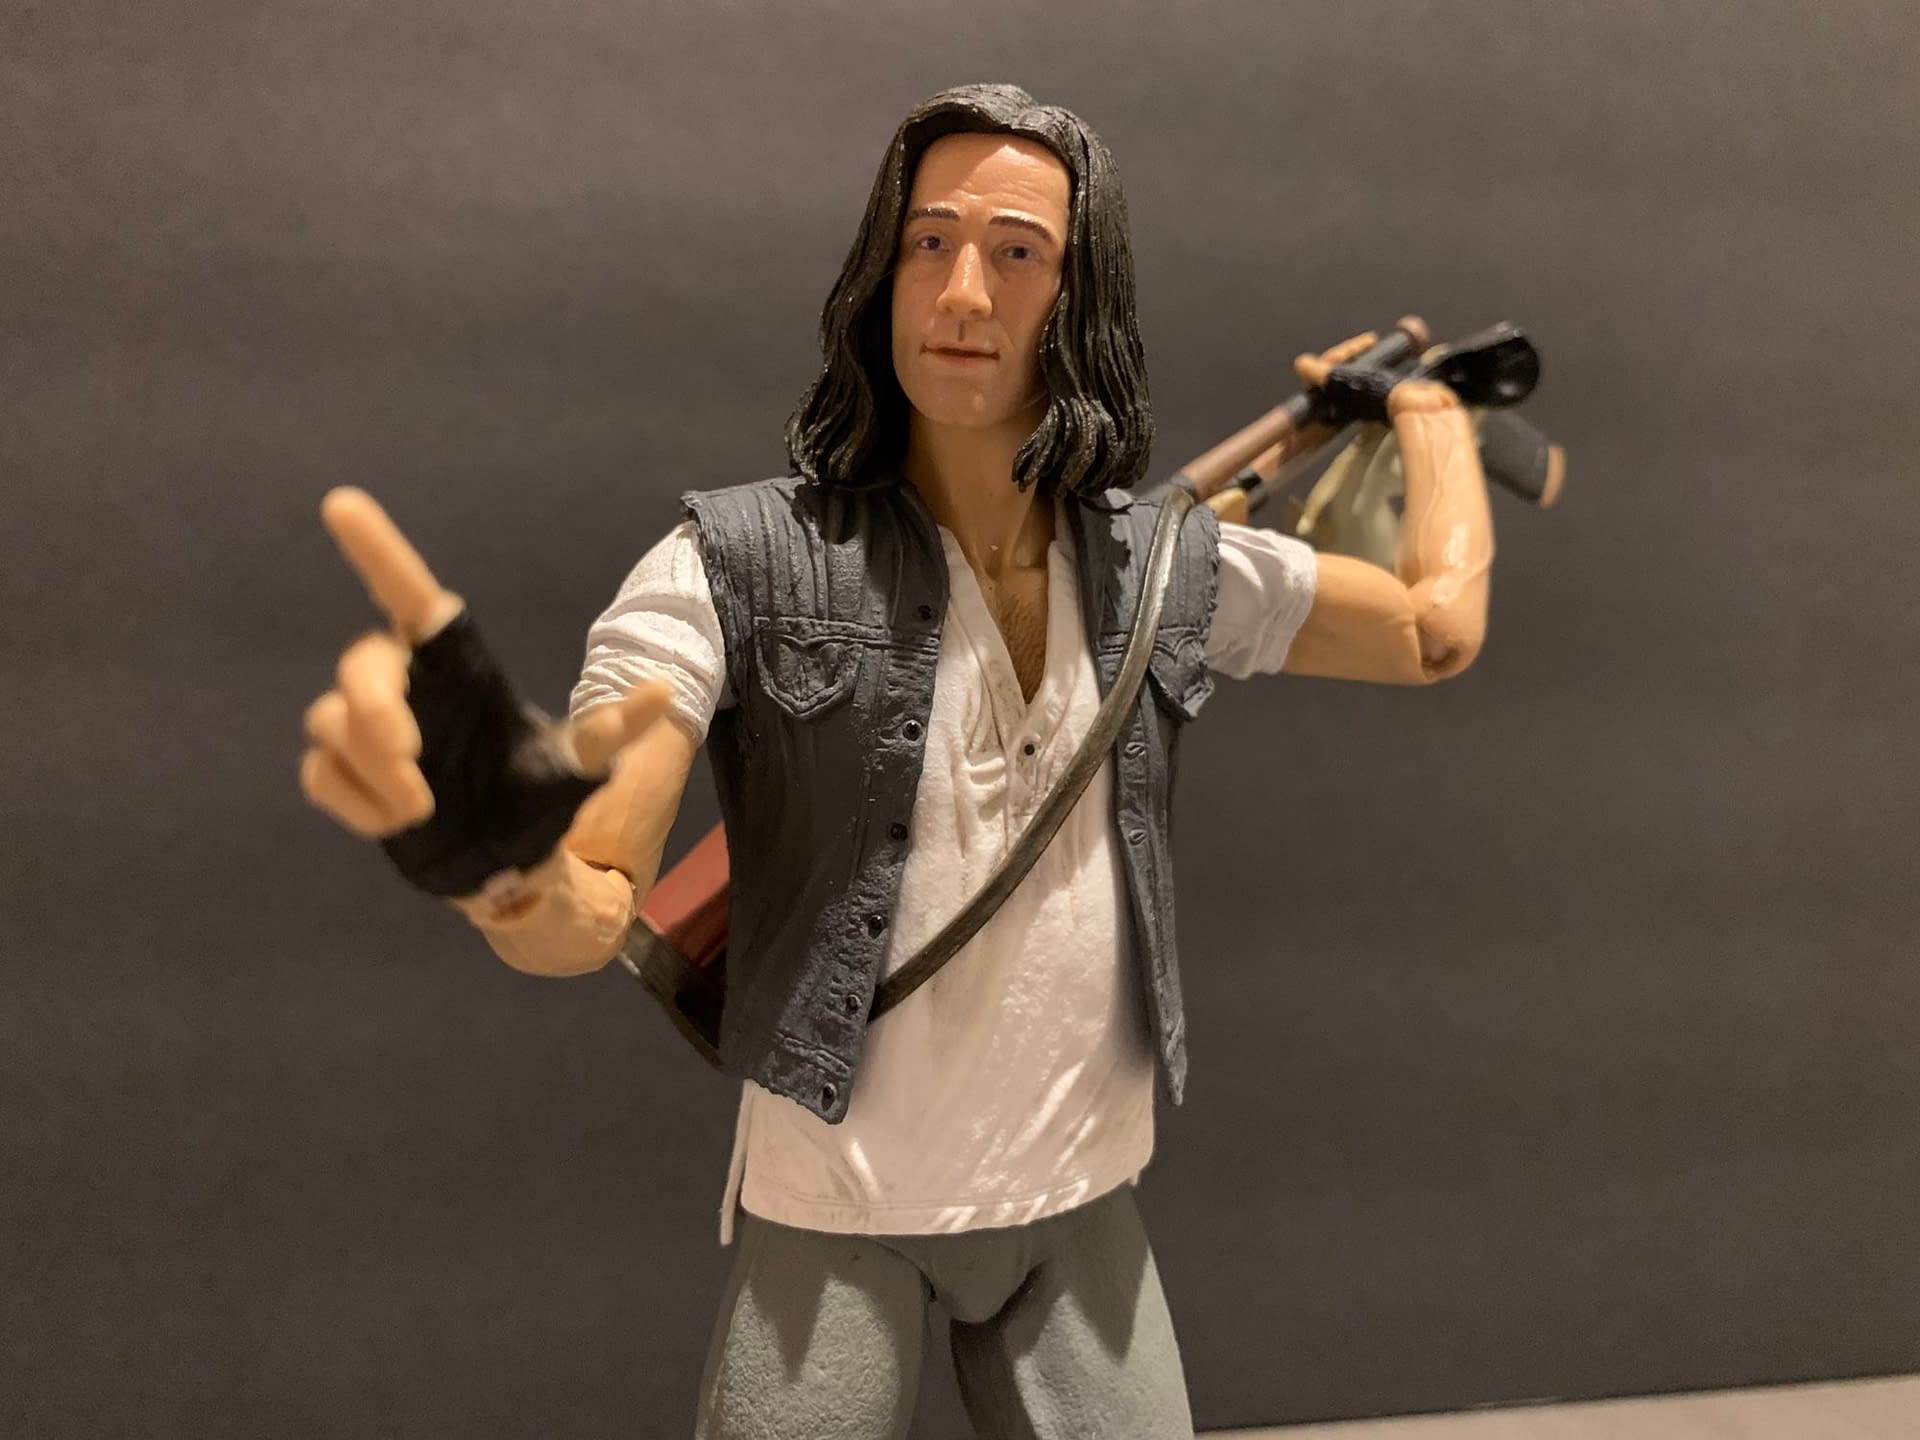 NECA's TMNT Movie April & Ultimate Casey Jones Are A Mixed Bag